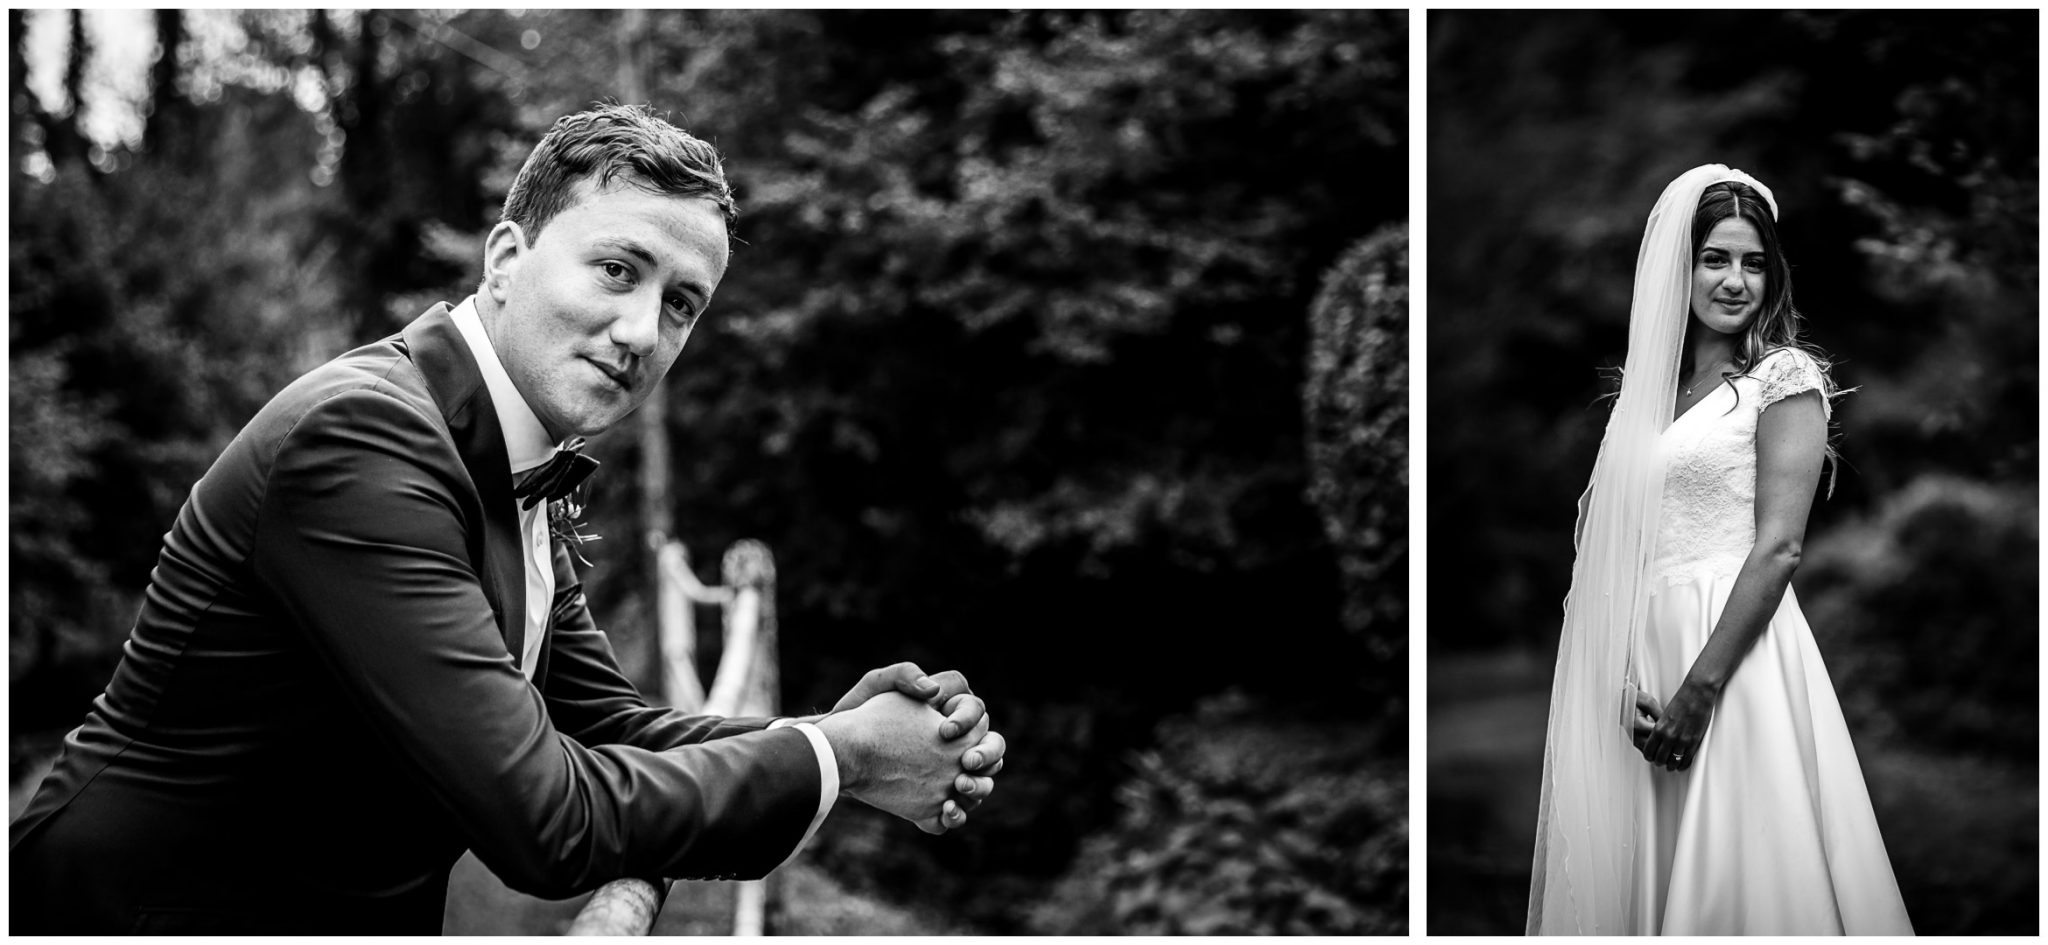 Black and white portraits of bride and groom